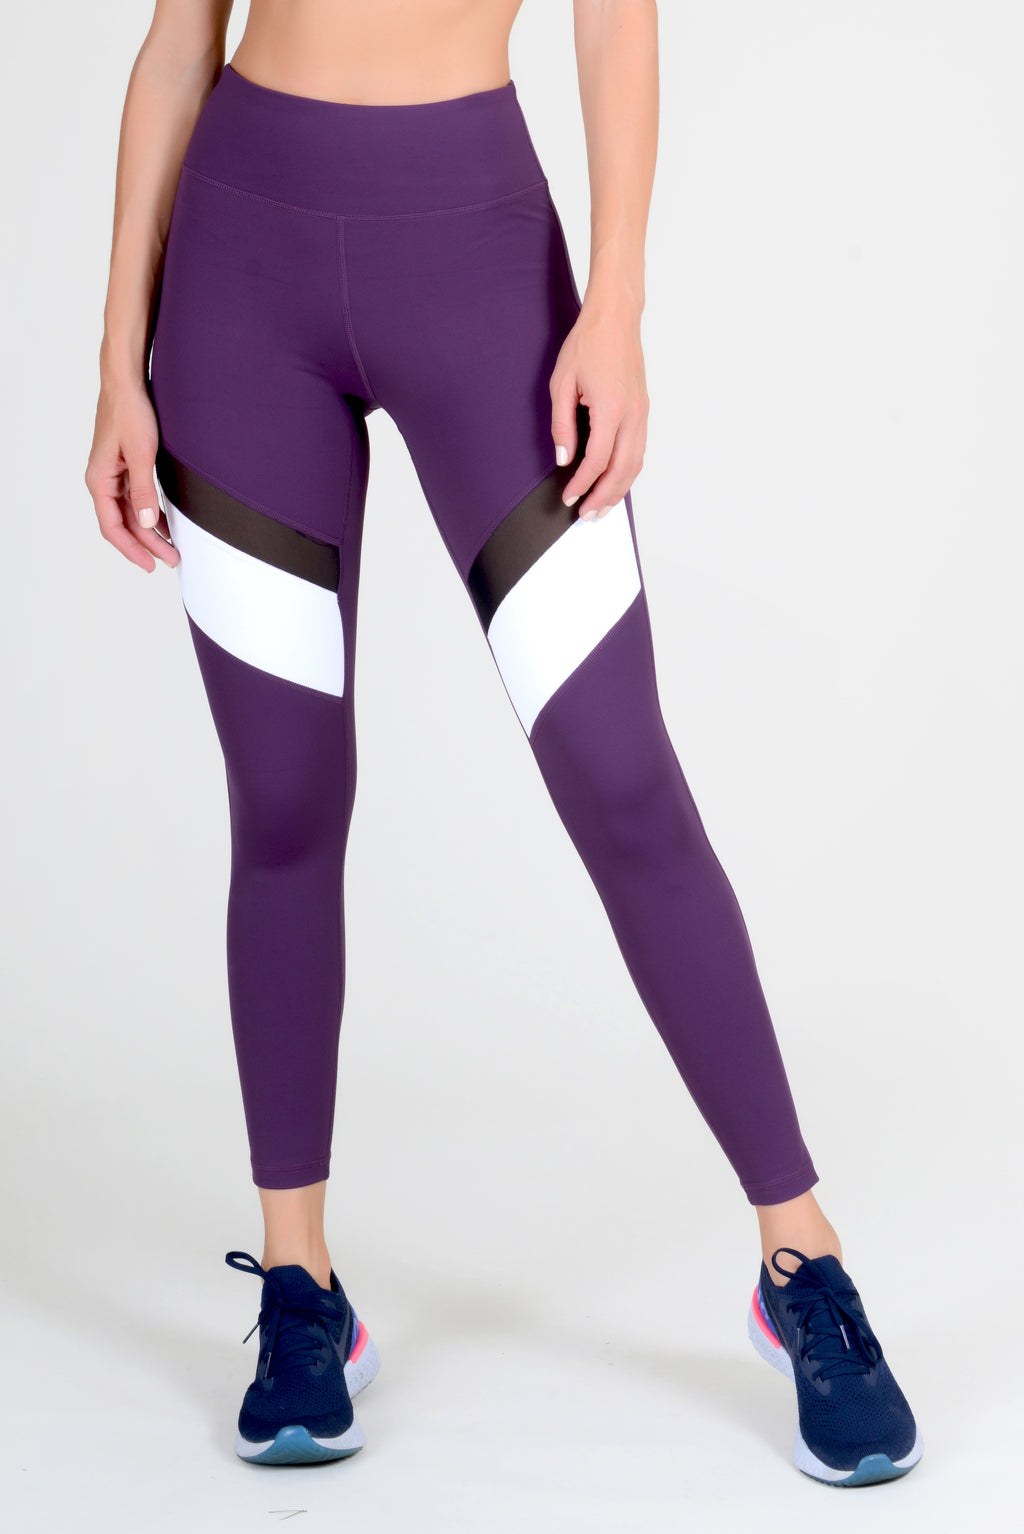 purple high waist workout leggings with mesh colorblock 